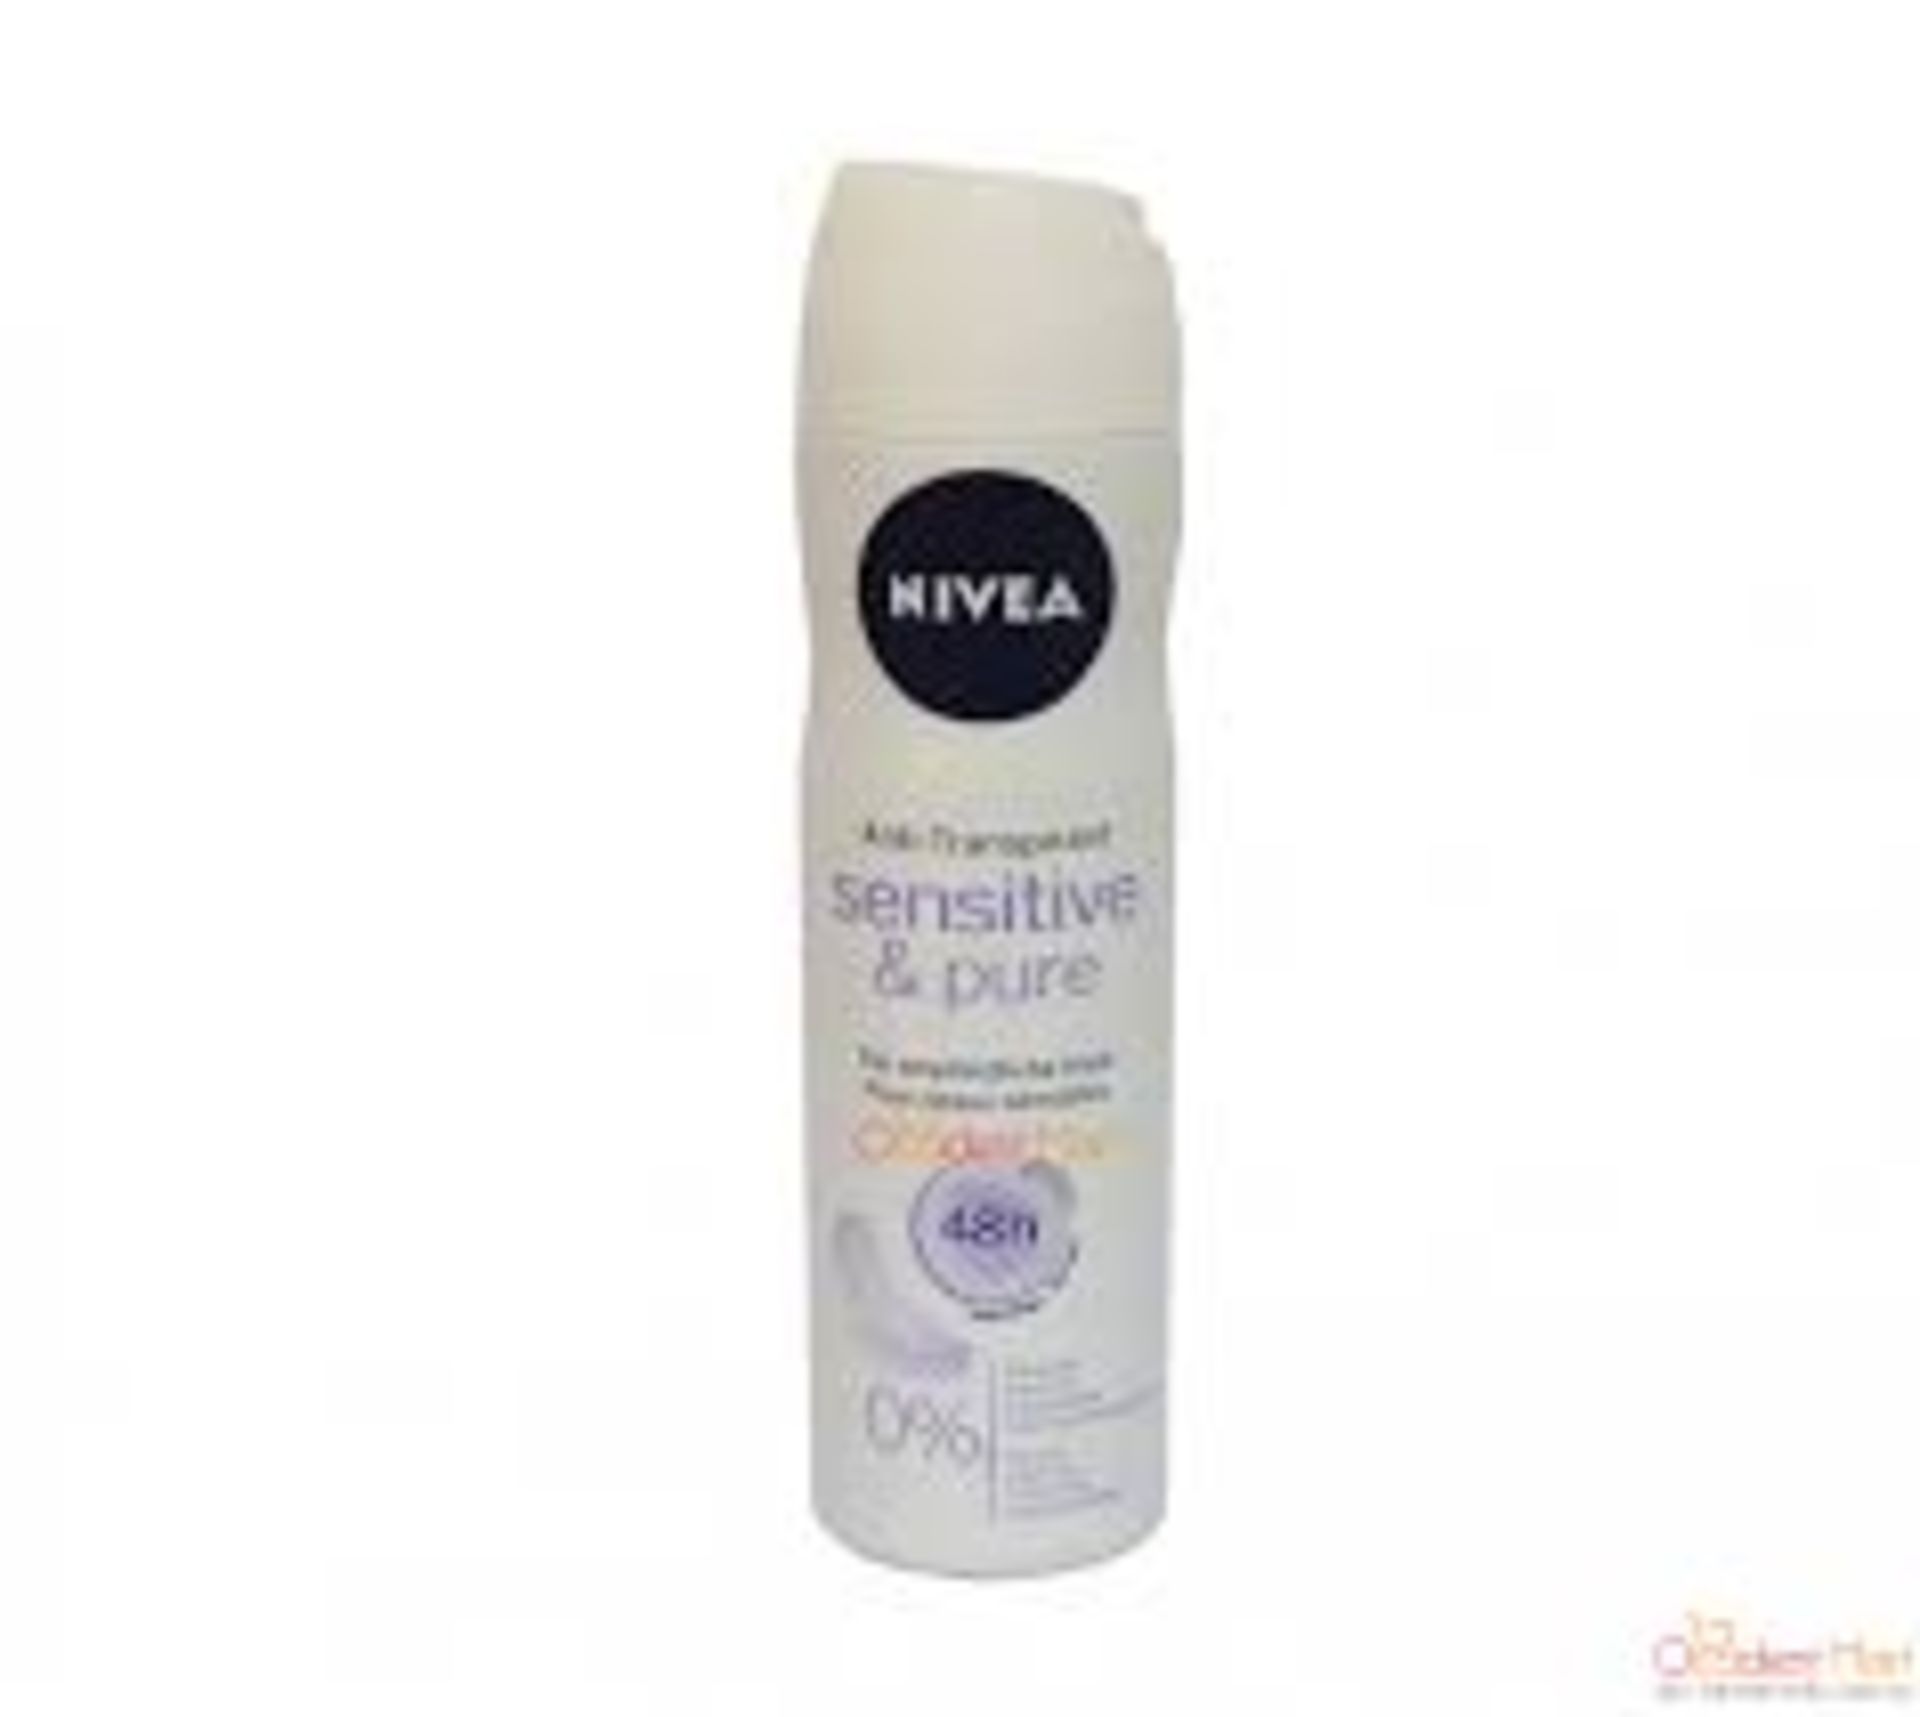 V Brand New Six Cans Of Nivea Sensetive and Pure 48 Hour Anti-Transpirant  SRP £2.99 Each